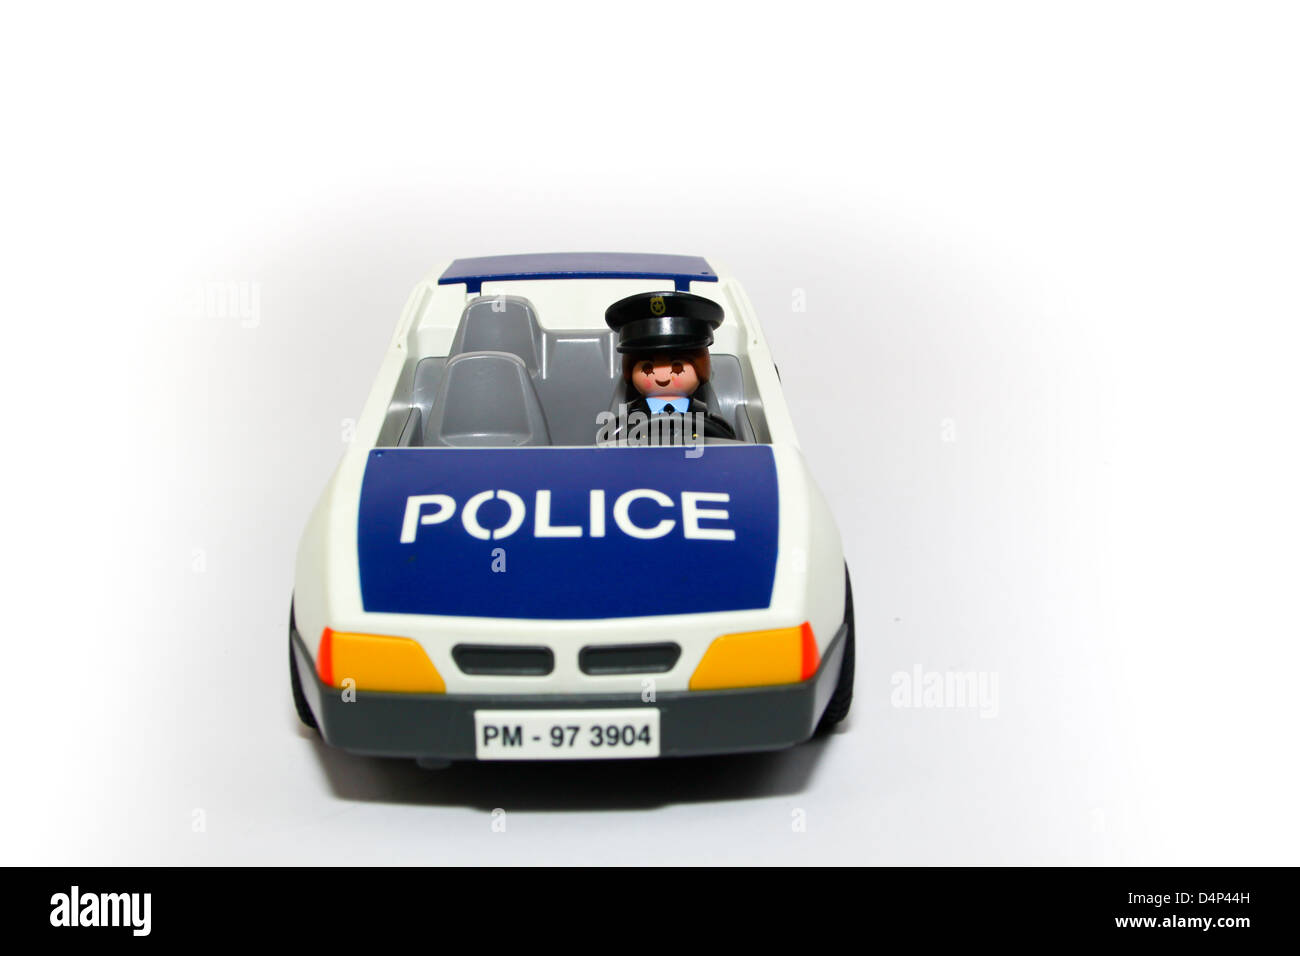 Plastic toy police car emergency concept service Stock Photo